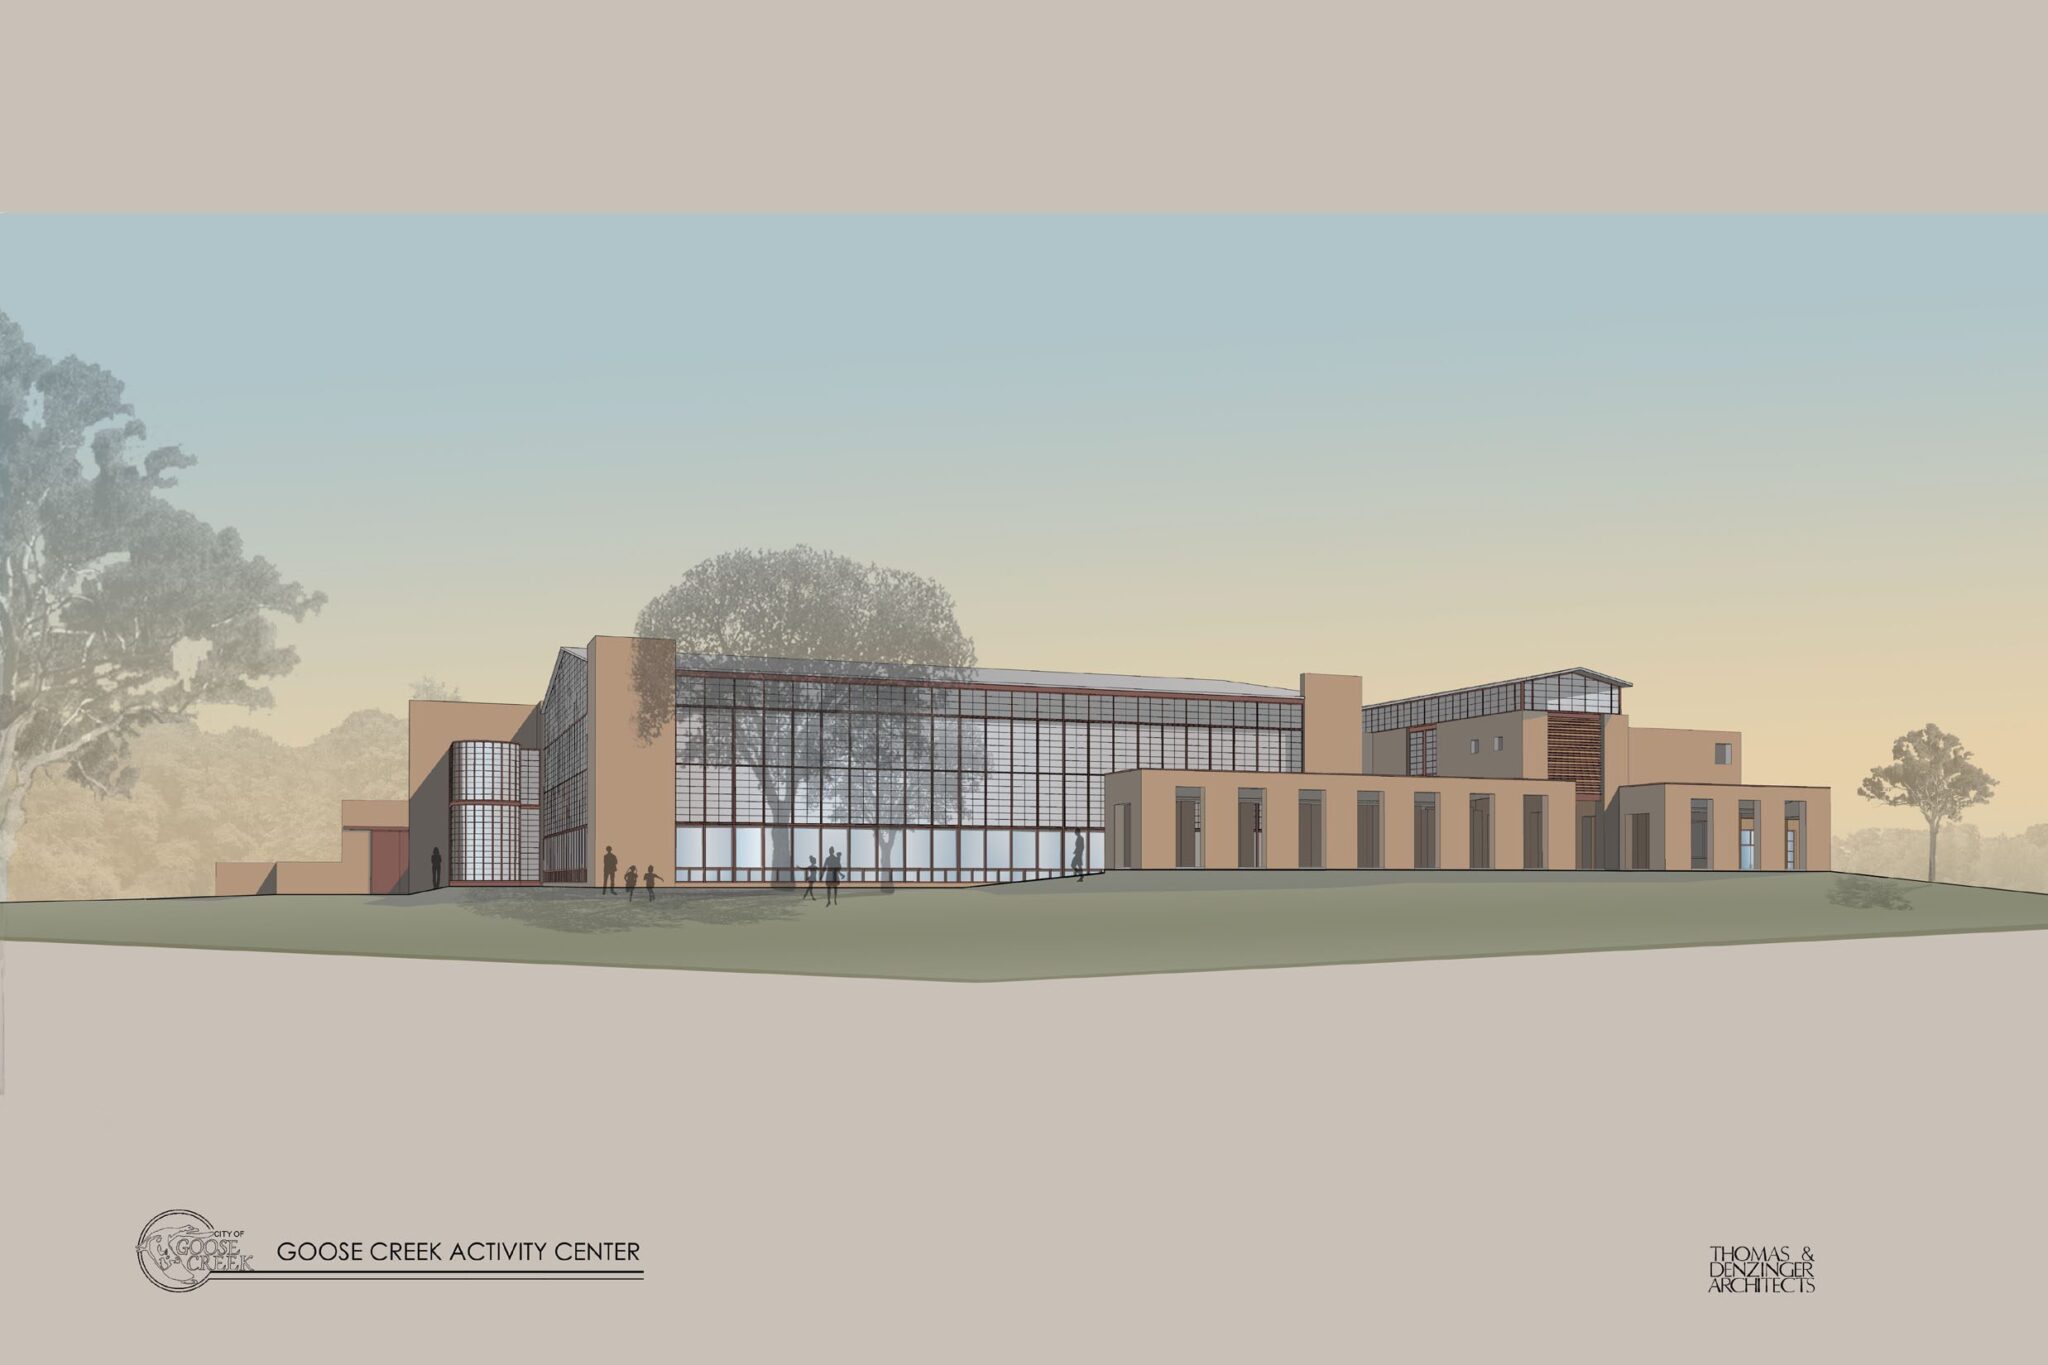 An architectural rendering of the new facility, which will house a 10,837-square-foot gymnastics center.